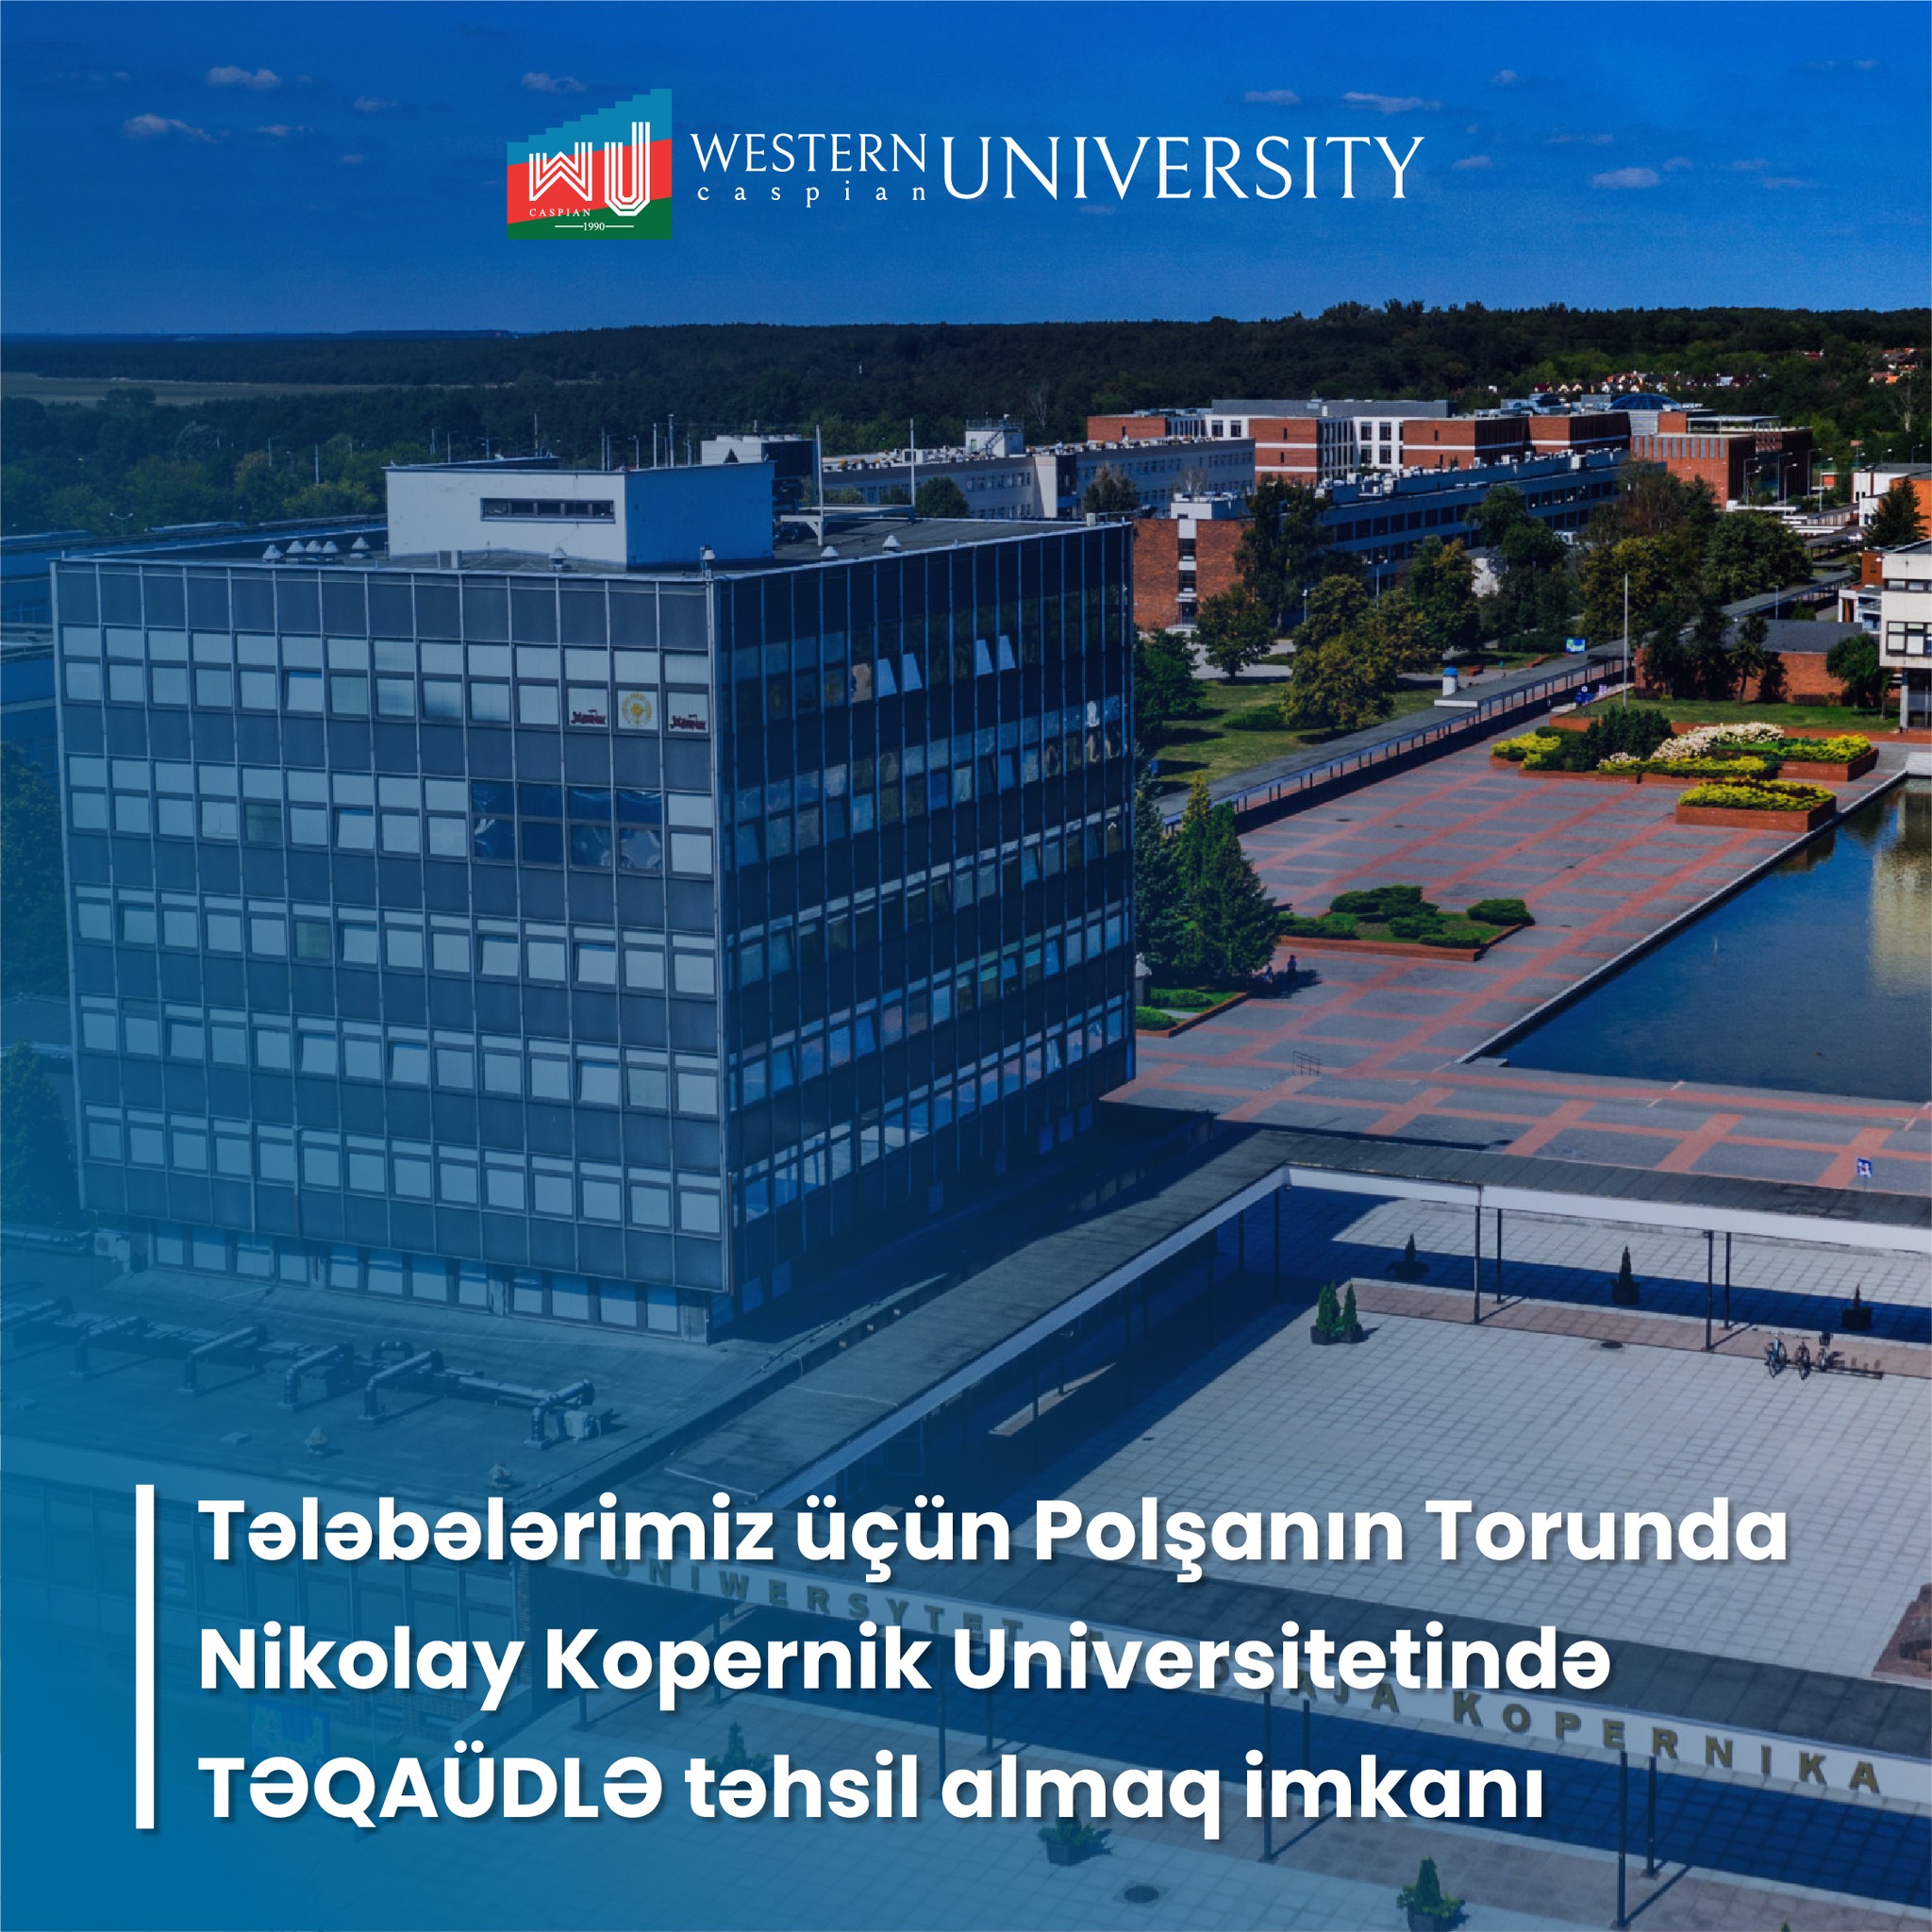 Scholarship Opportunity for Our Students to Study at Nicolaus Copernicus University in Torun, Poland